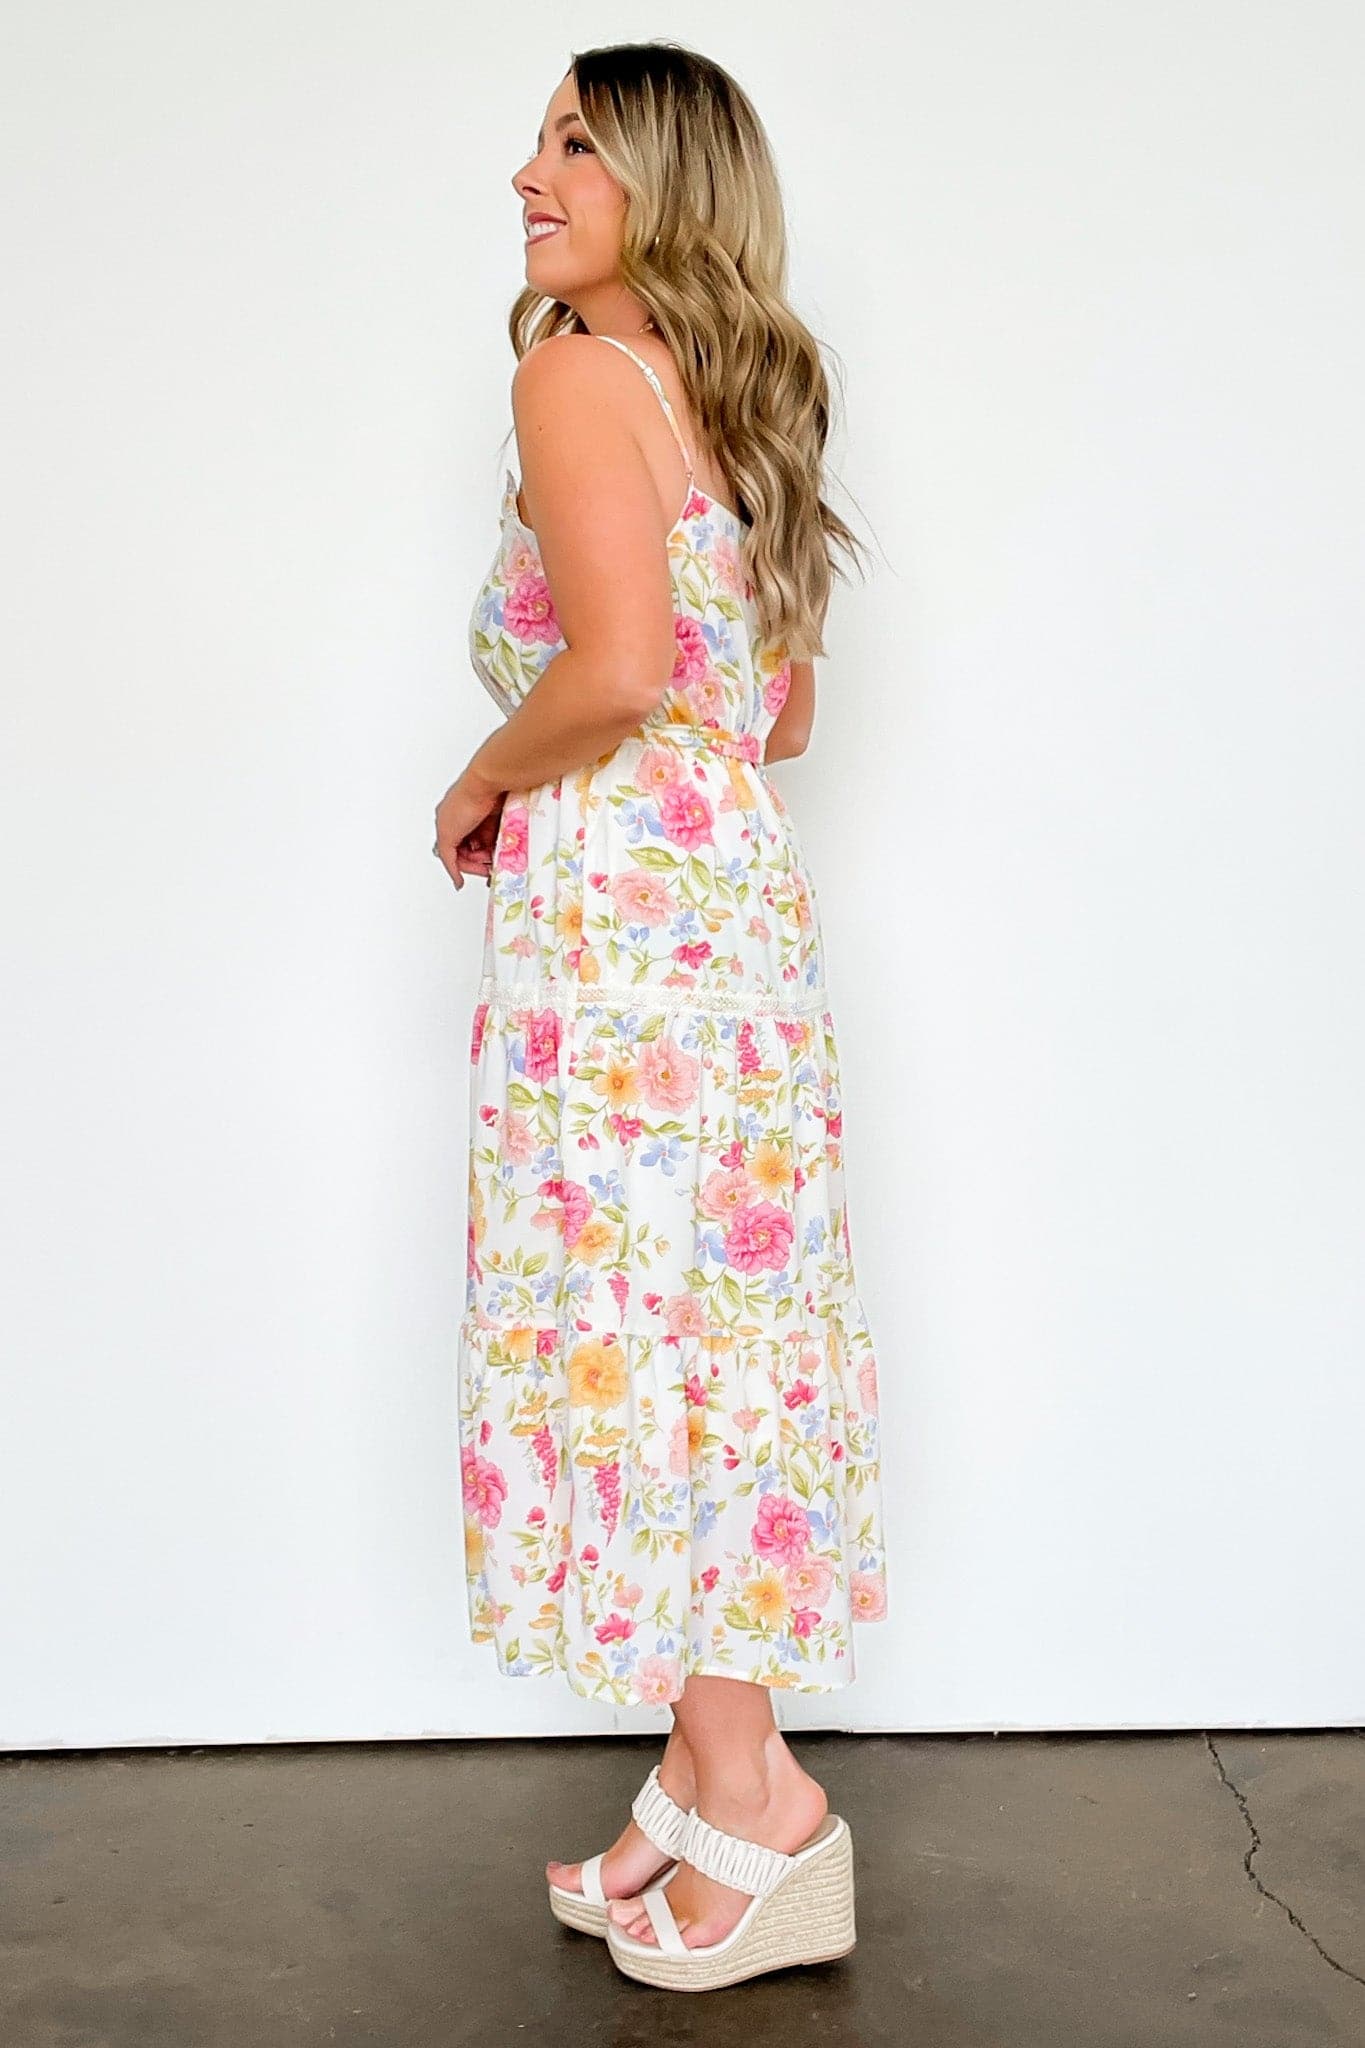  Eloquent Efforts Floral Lace Midi Dress - FINAL SALE - Madison and Mallory